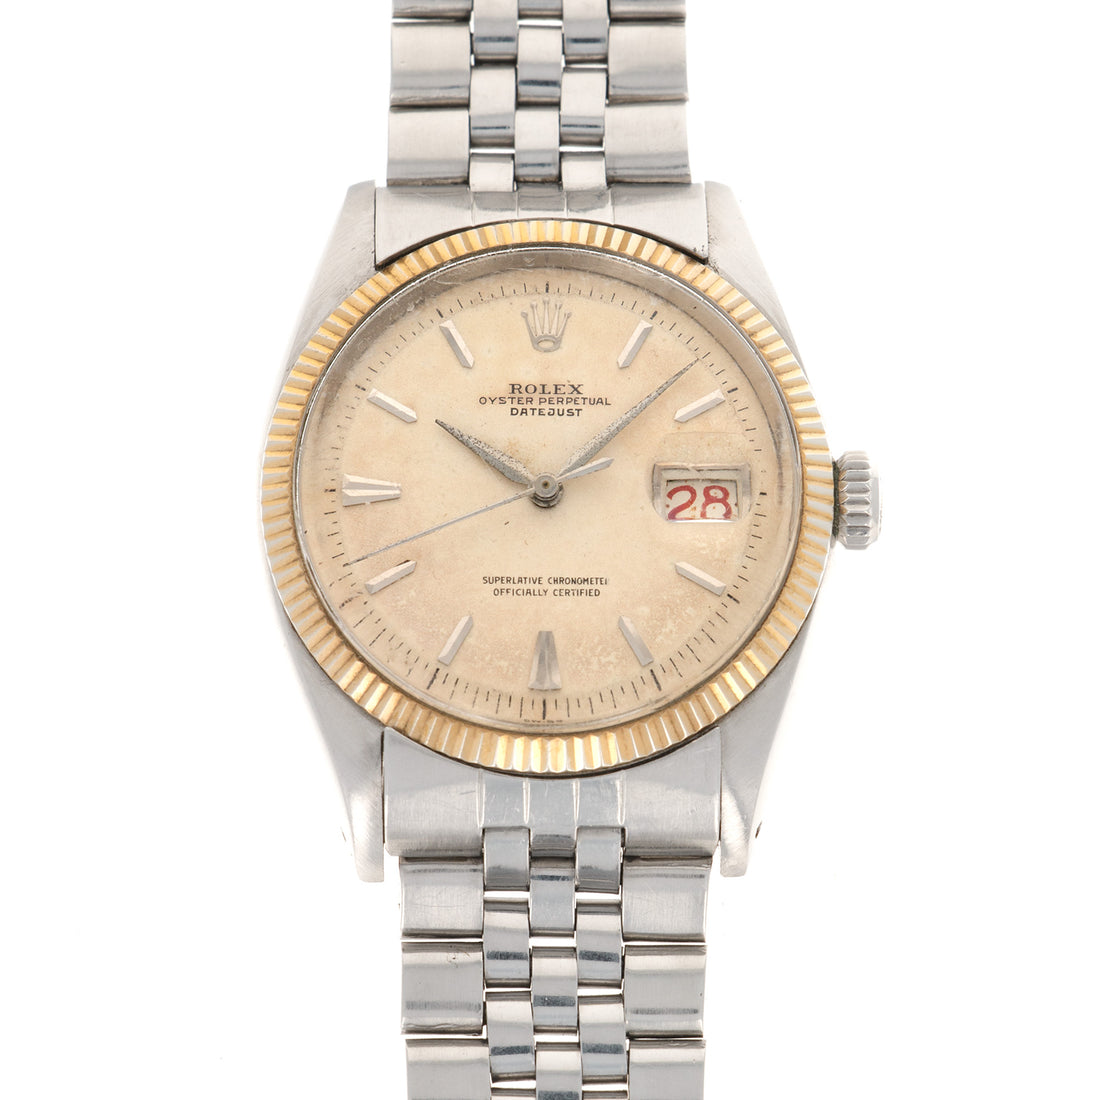 Rolex Stainless Steel Early Datejust Watch Ref. 6605